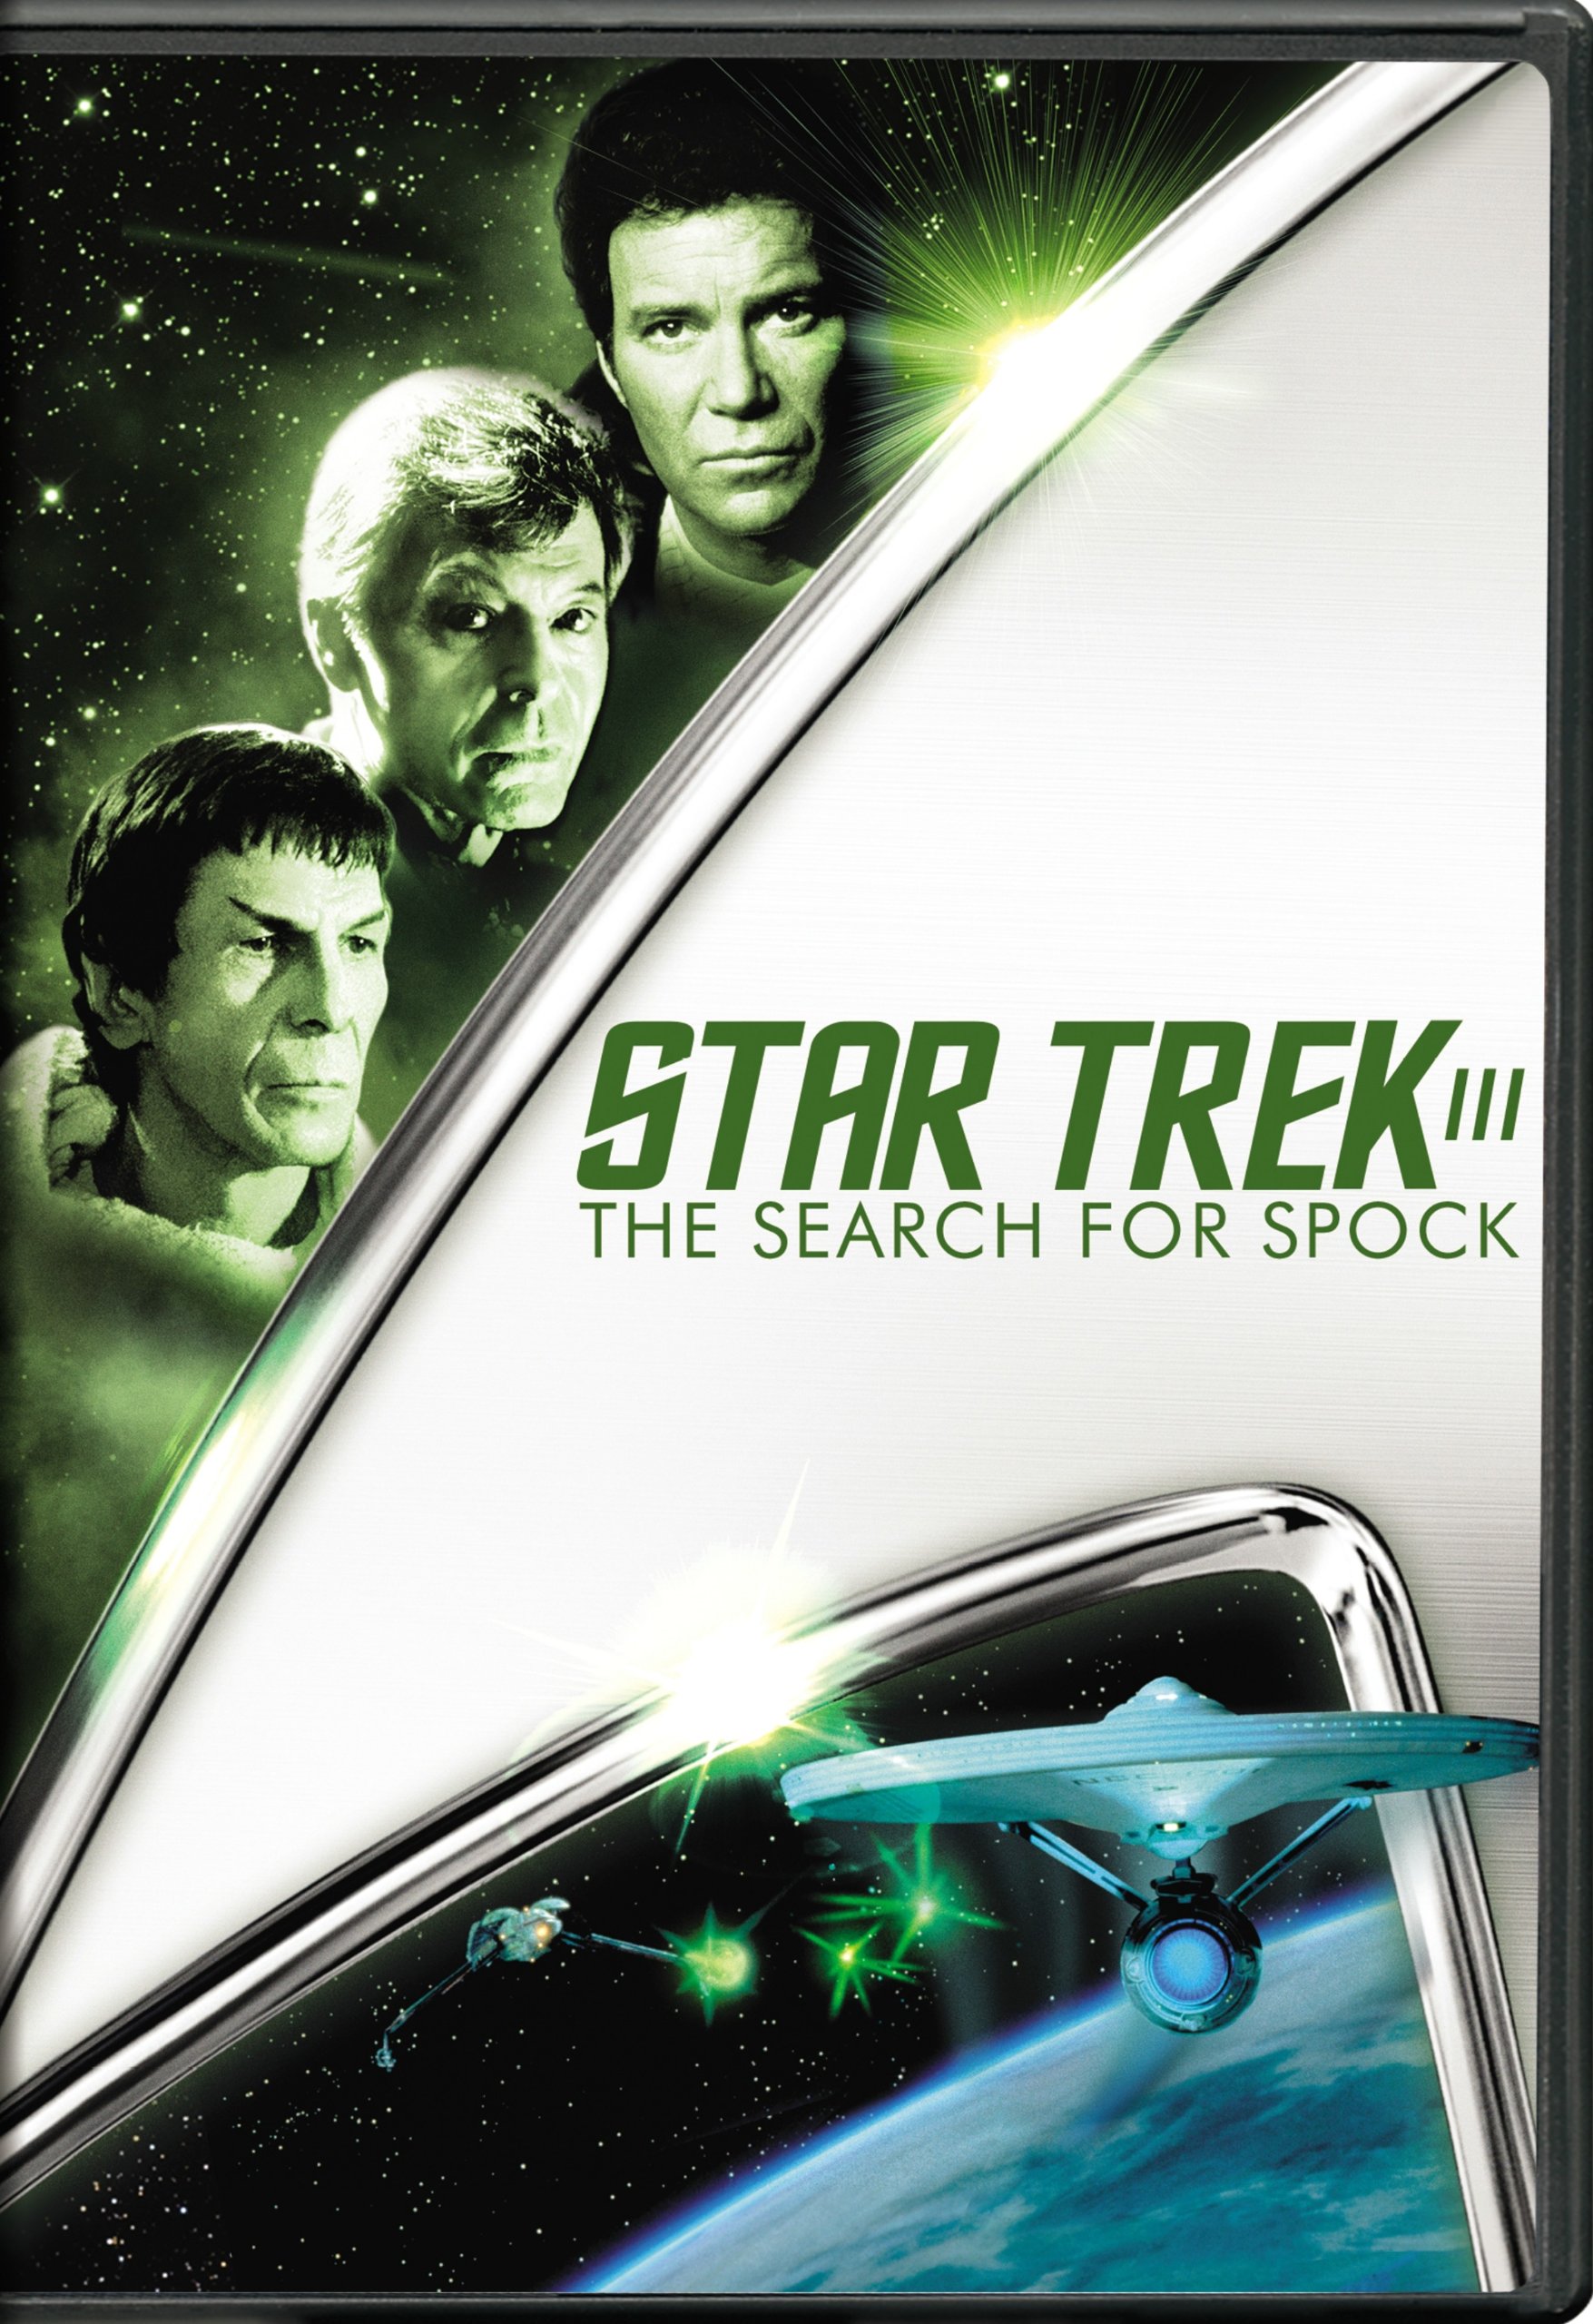 Amazing Star Trek III: The Search For Spock Pictures & Backgrounds